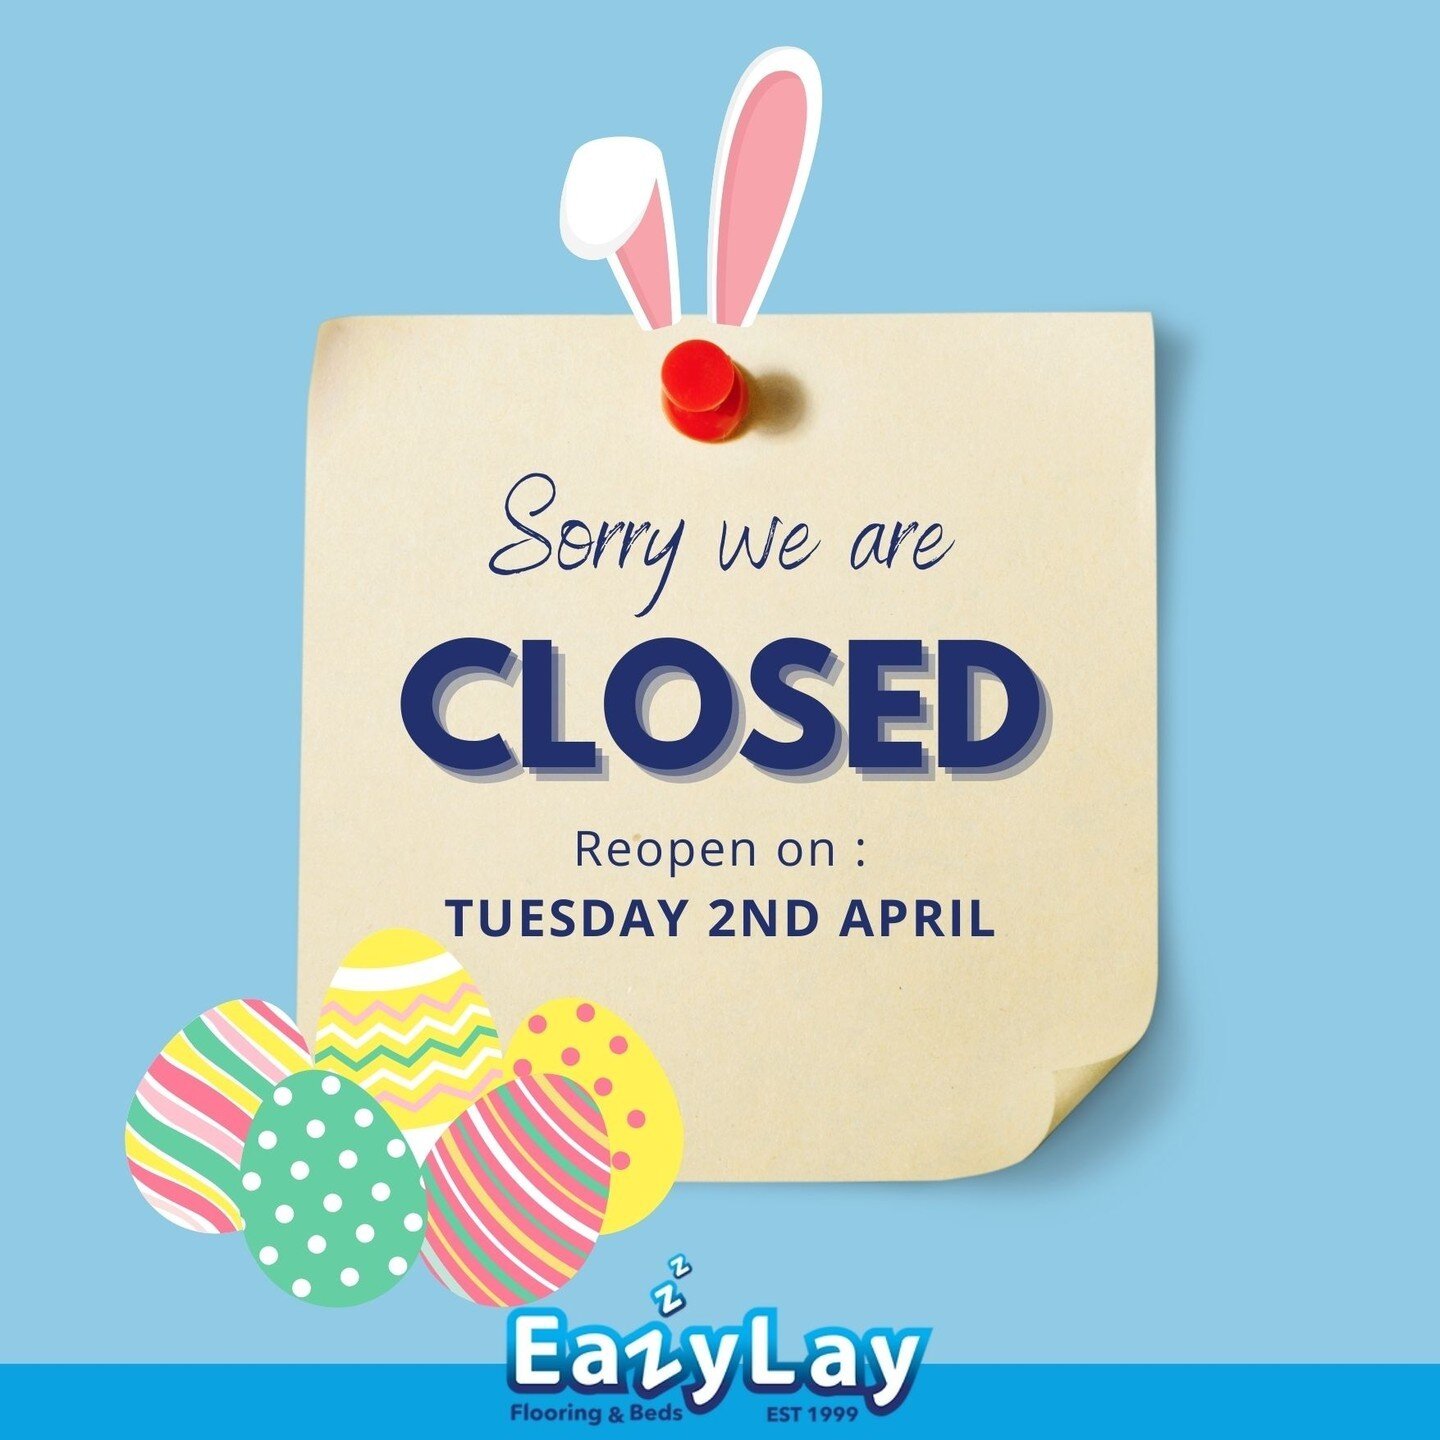 🐰🌷 As a family-run business, we believe Easter is best spent with loved ones! Please note, we'll be closed for the holiday and will reopen on Tuesday, April 2nd. Wishing you all a joyous Easter! #FamilyBusiness #FlooringExperts #HappyEaster